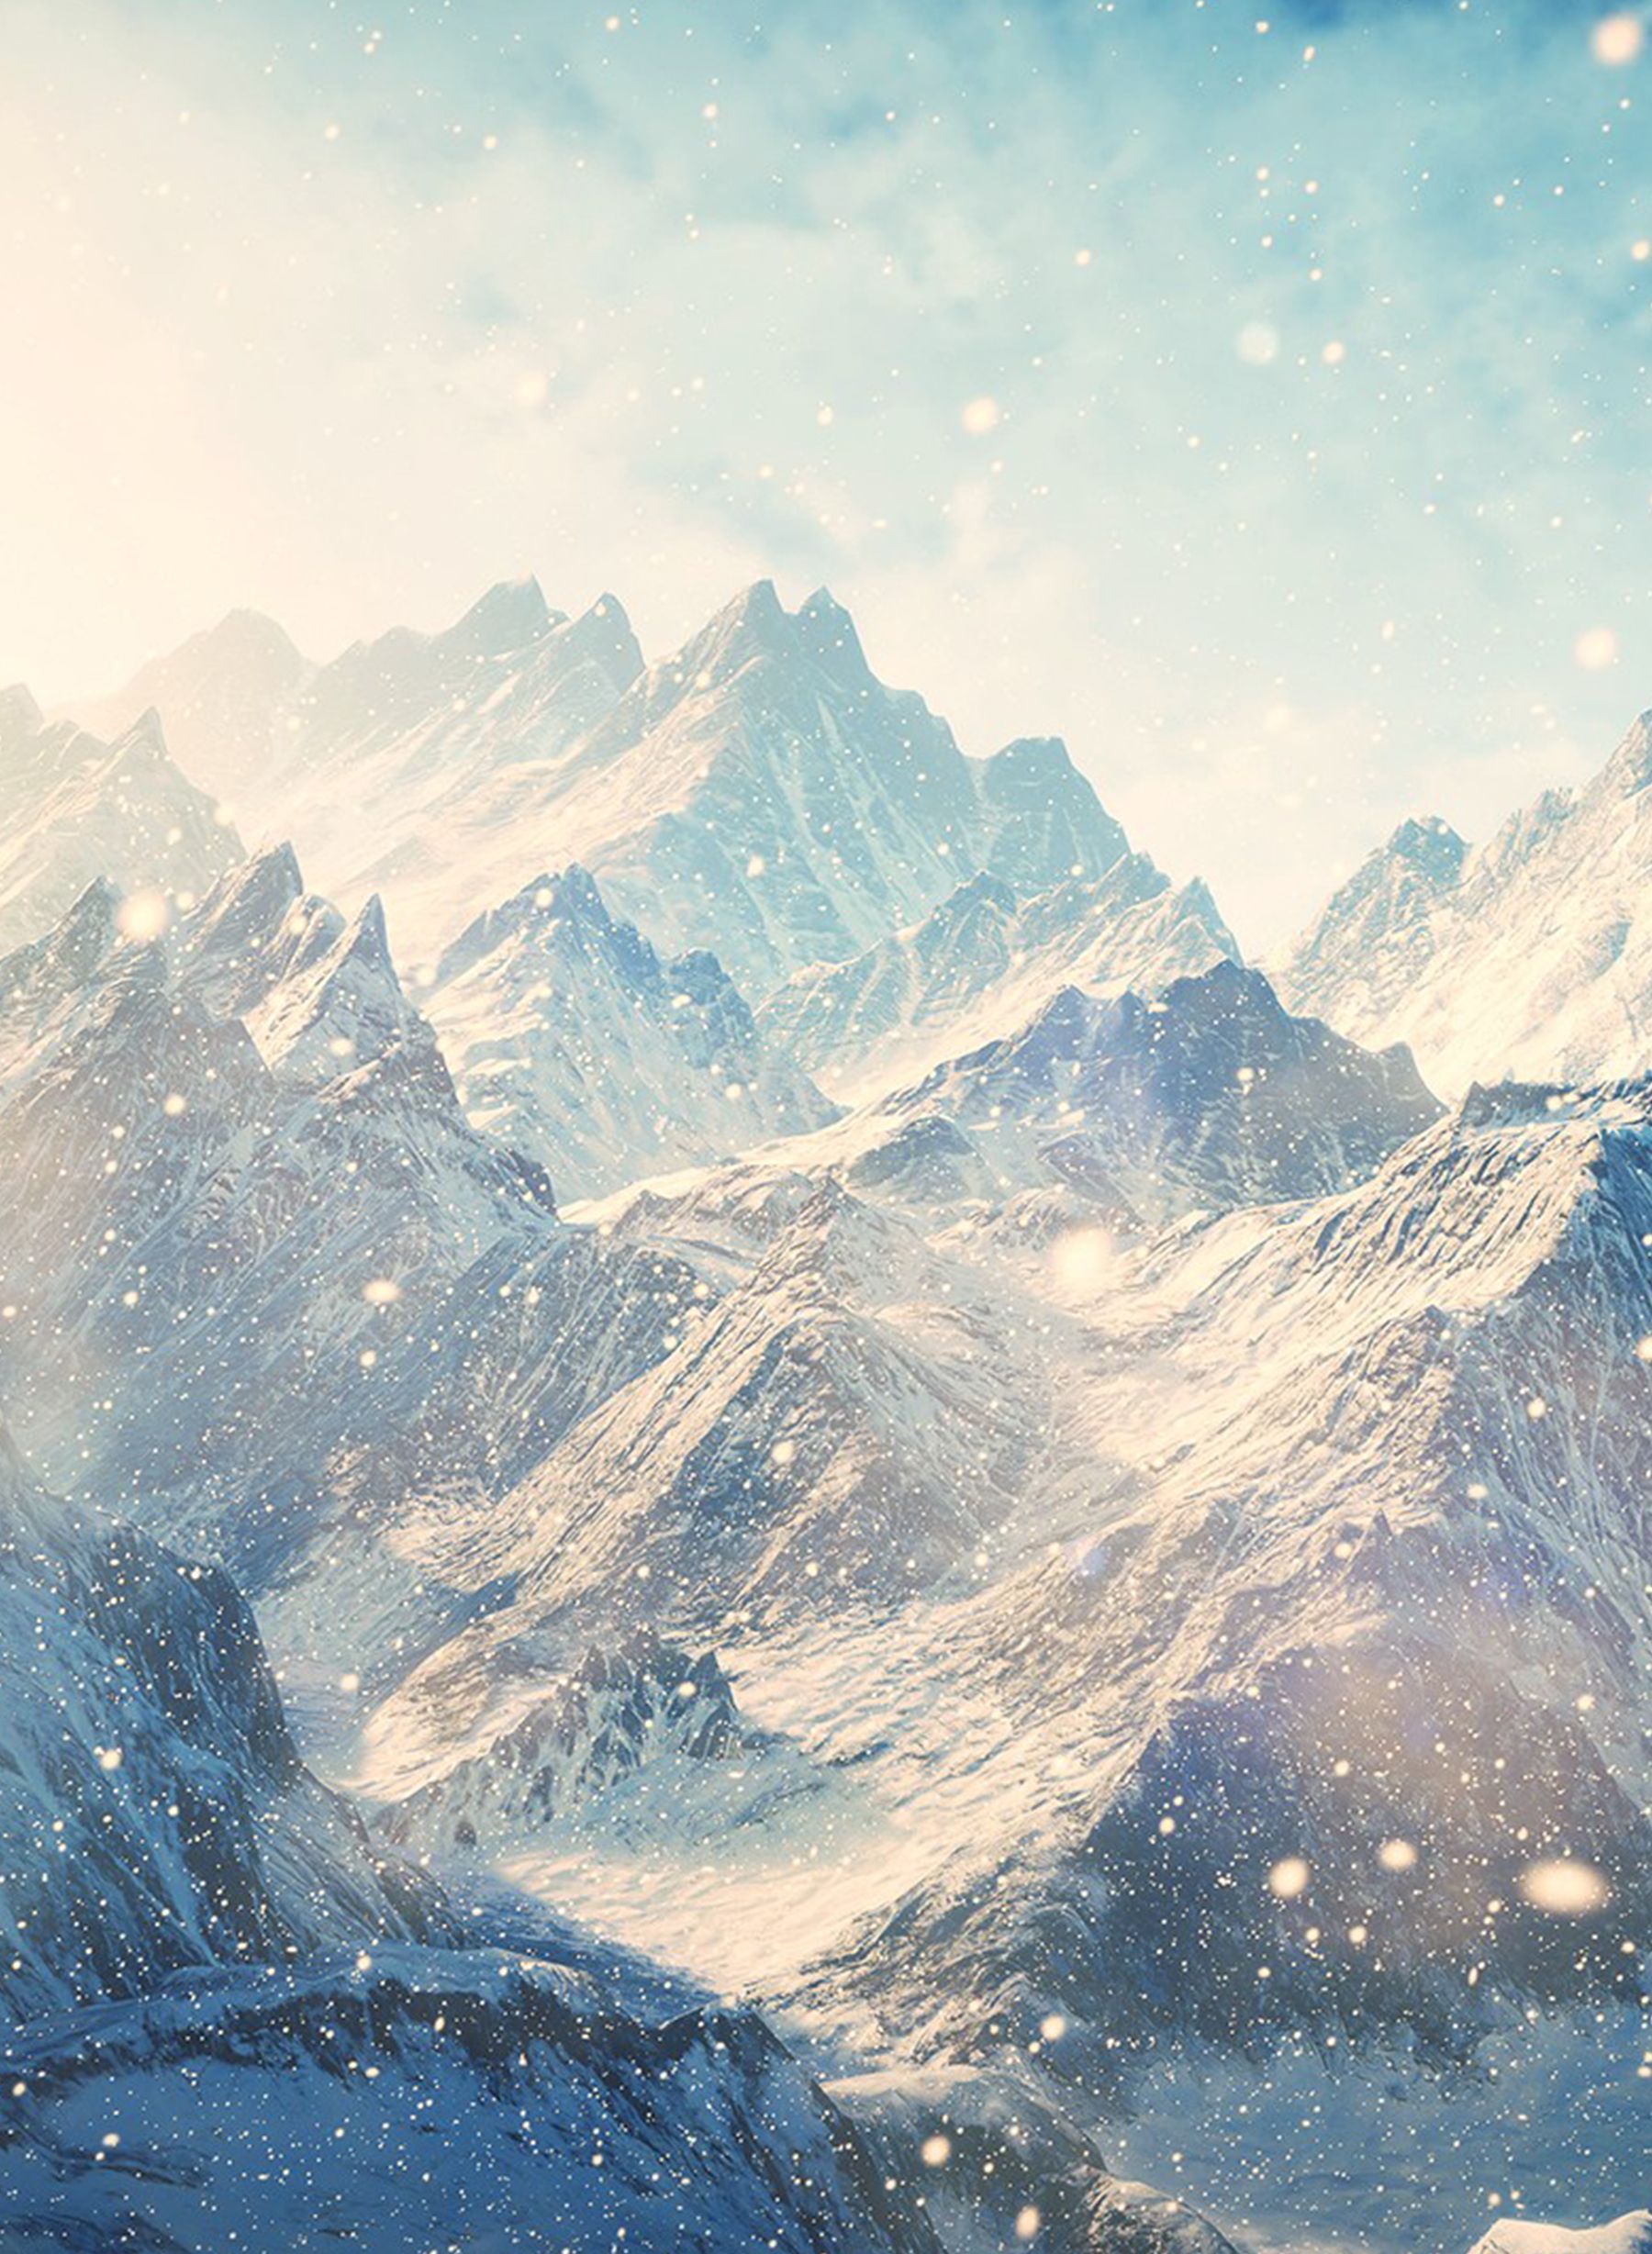 10 Top mountain aesthetic wallpaper desktop You Can Save It free ...